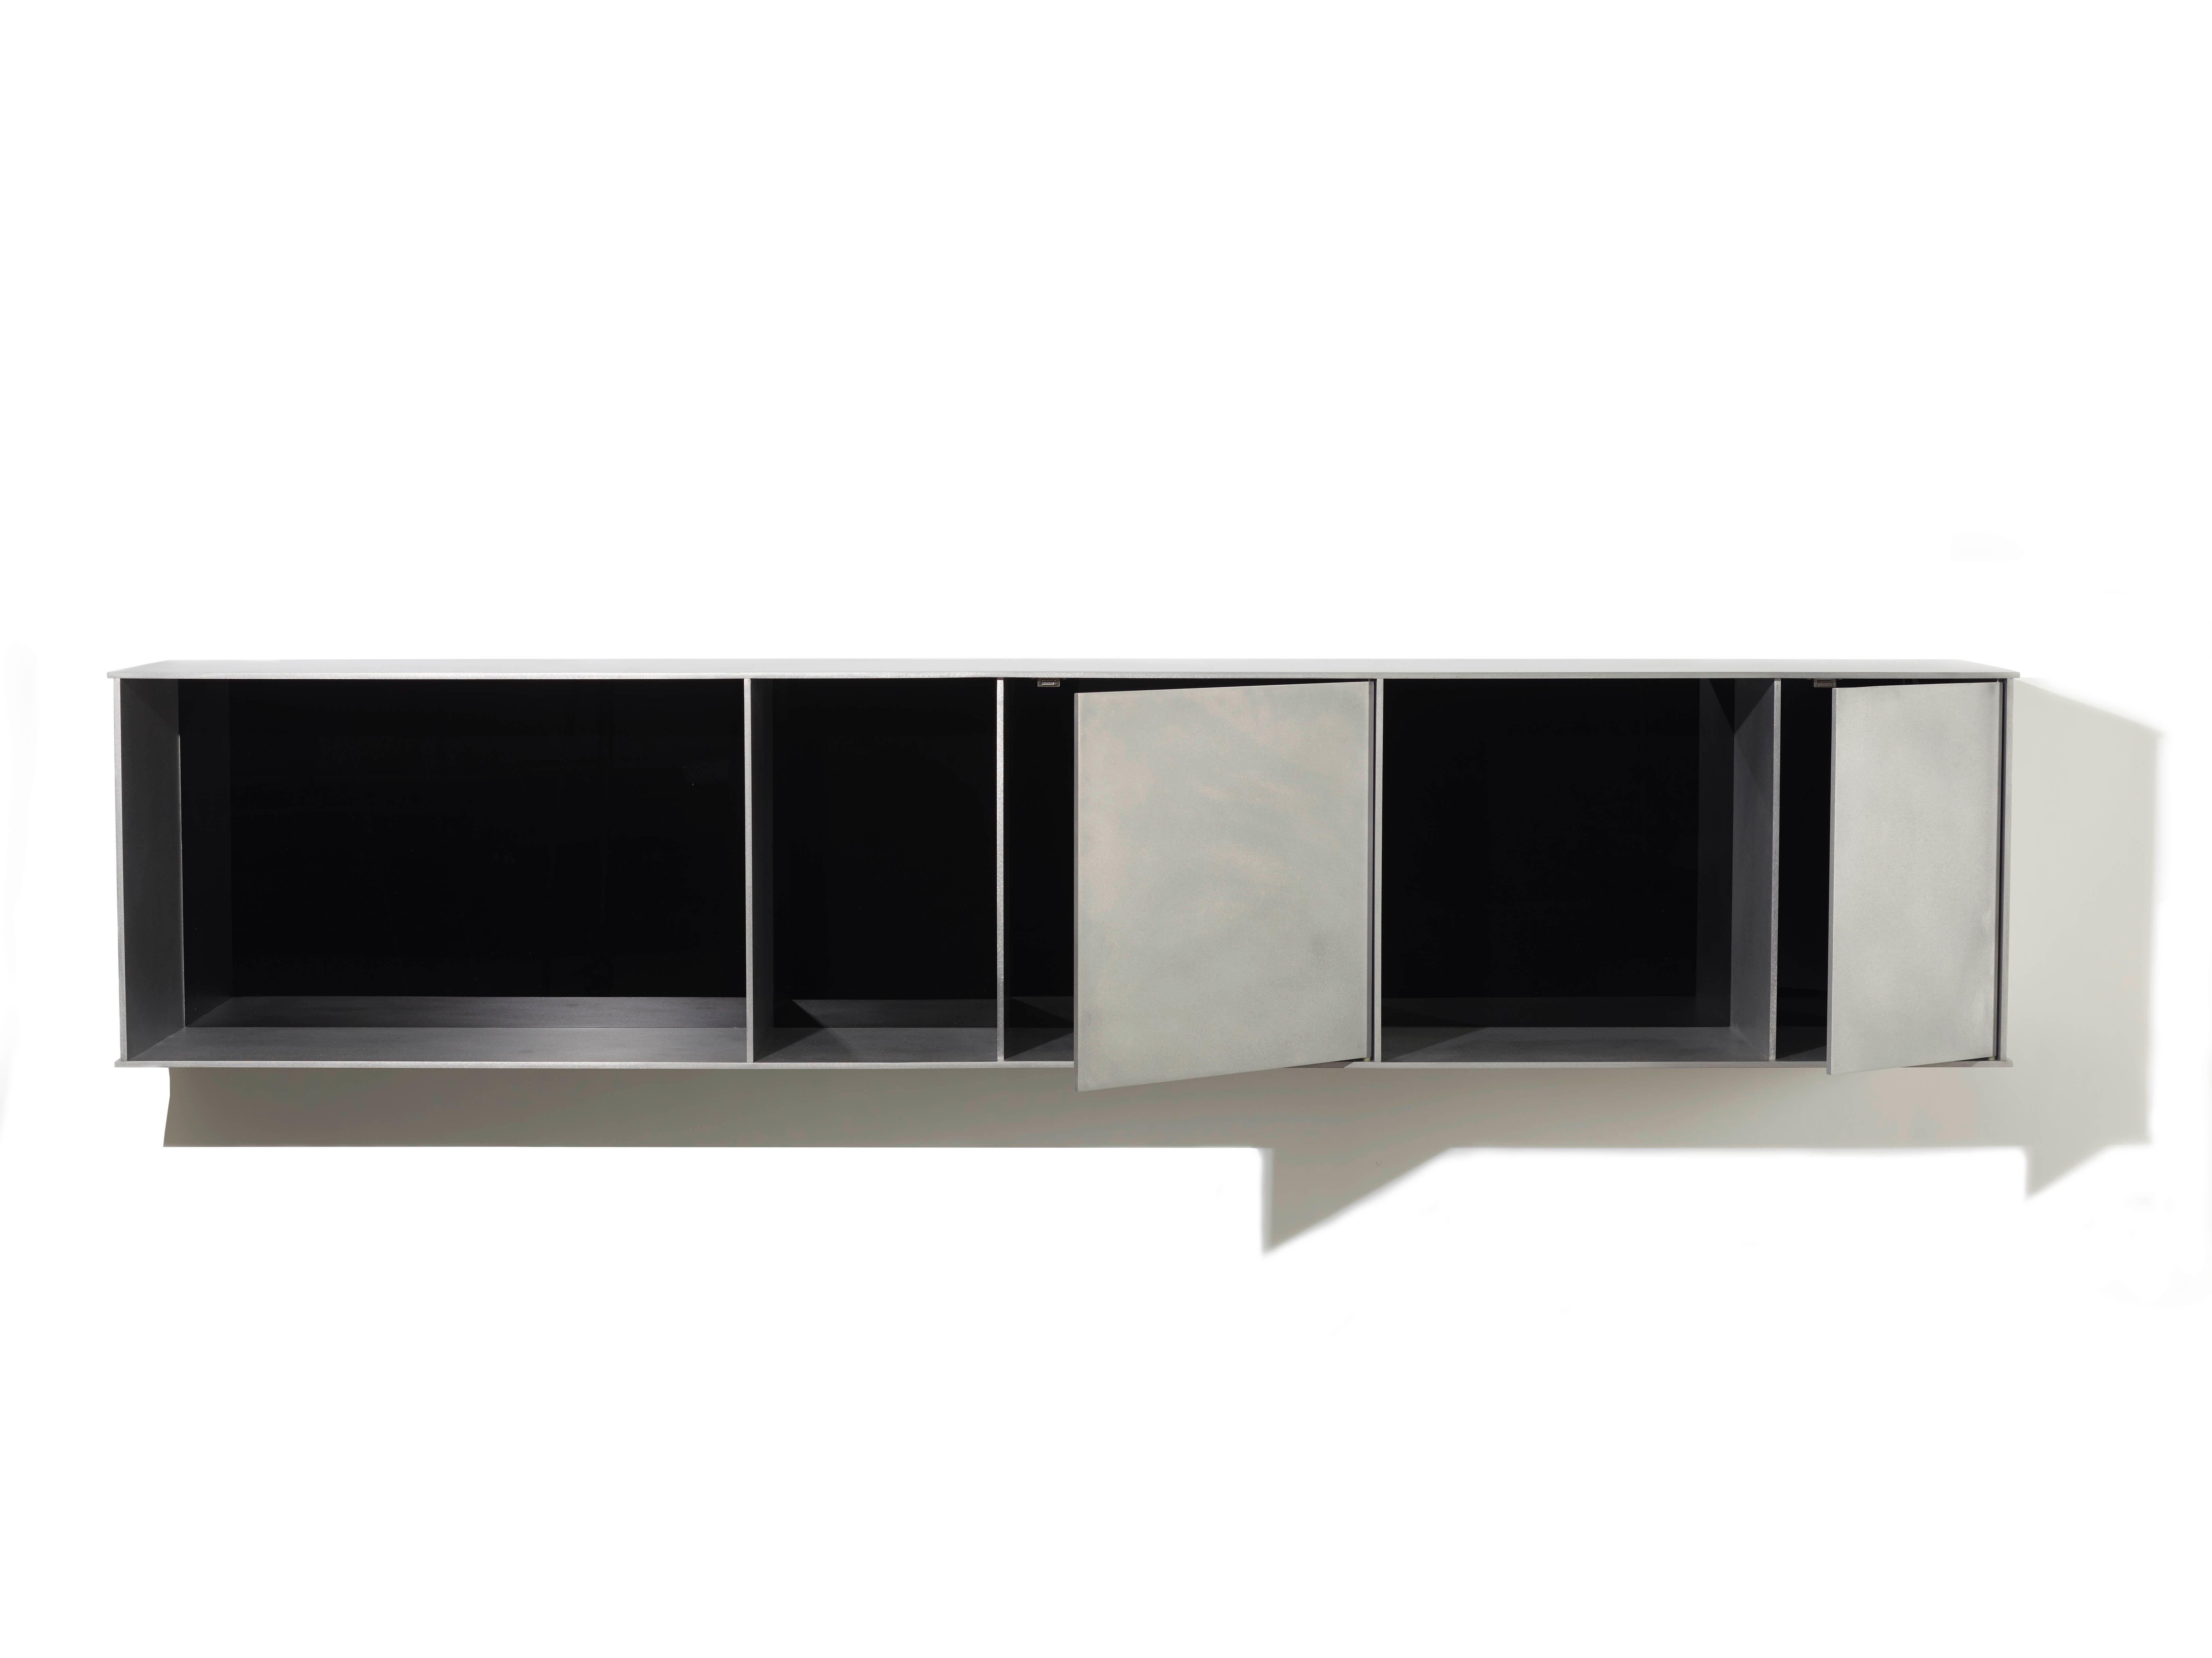 American G Wall-Mounted Shelf with Doors in Waxed Aluminum Plate by Jonathan Nesci For Sale